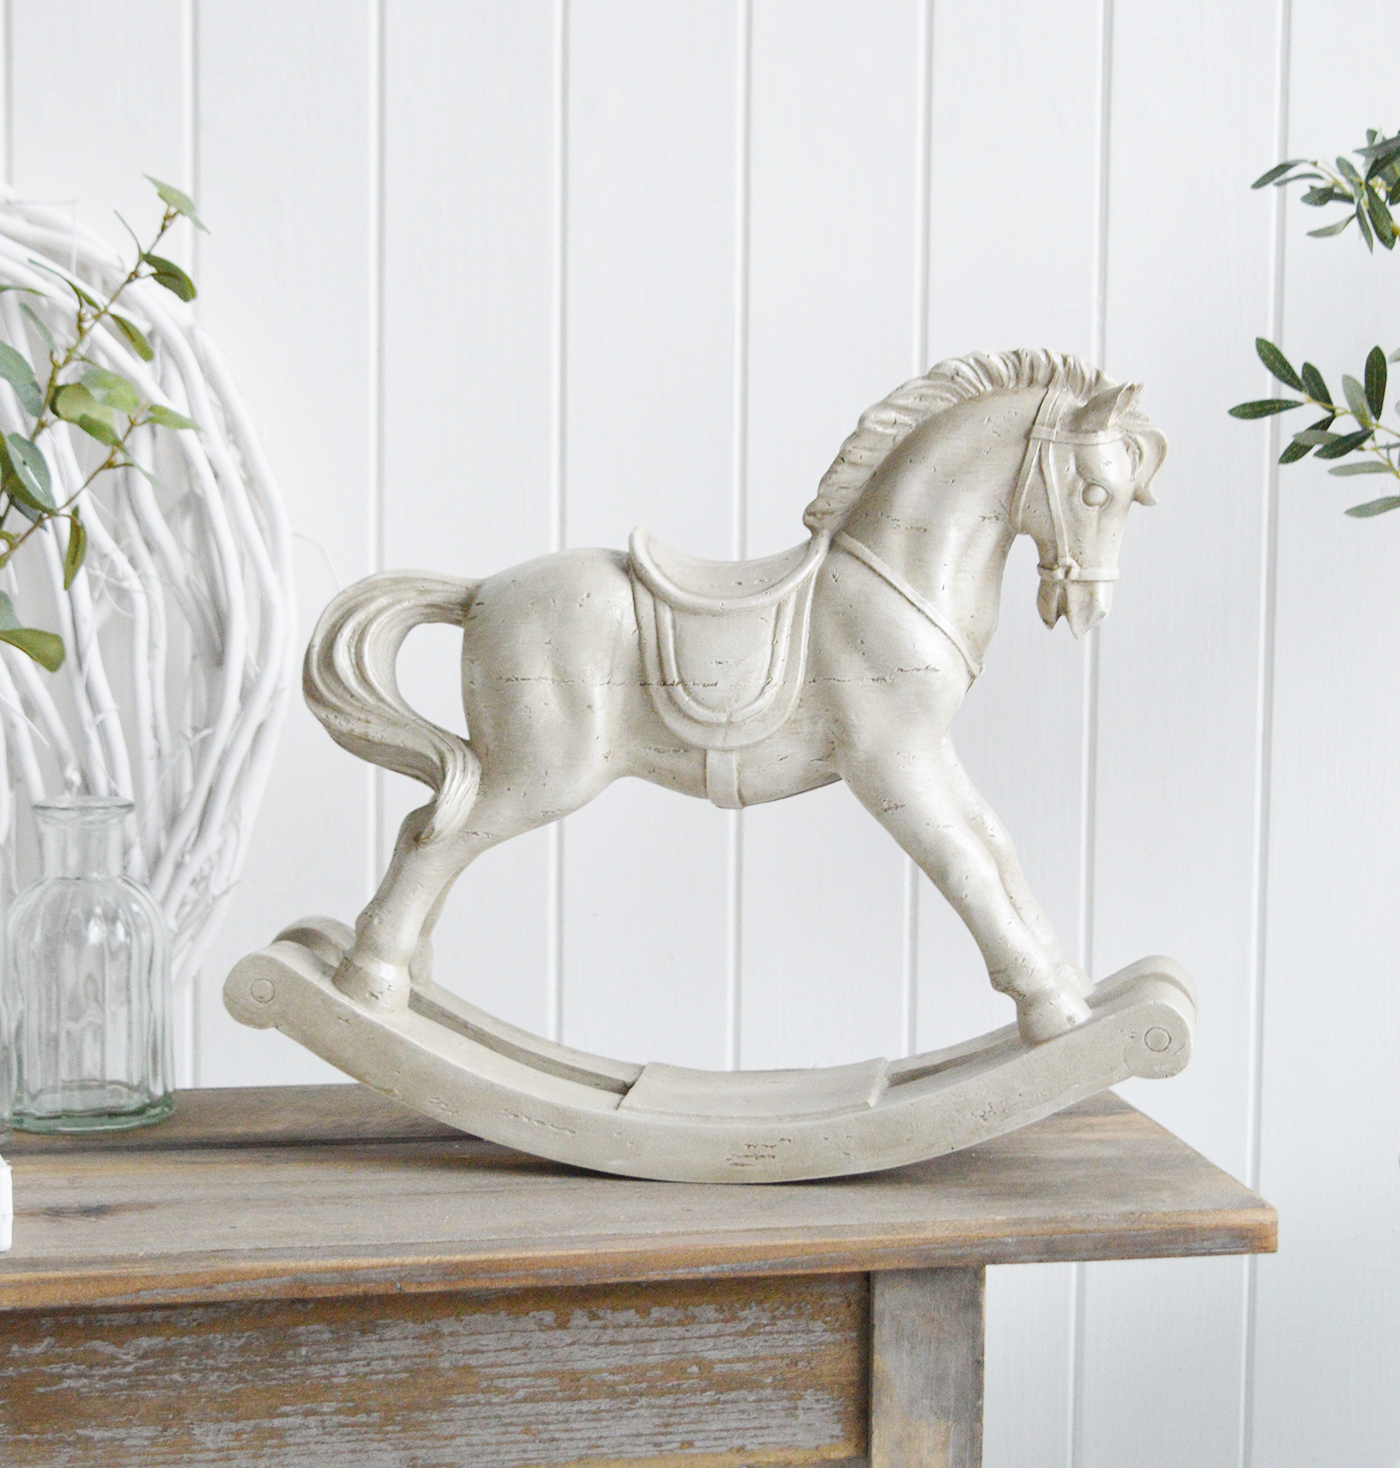 The White Lighthouse. White Furniture and accessories for the home. A decorative cream vintage rocking horse for New England Furniture and Interiors